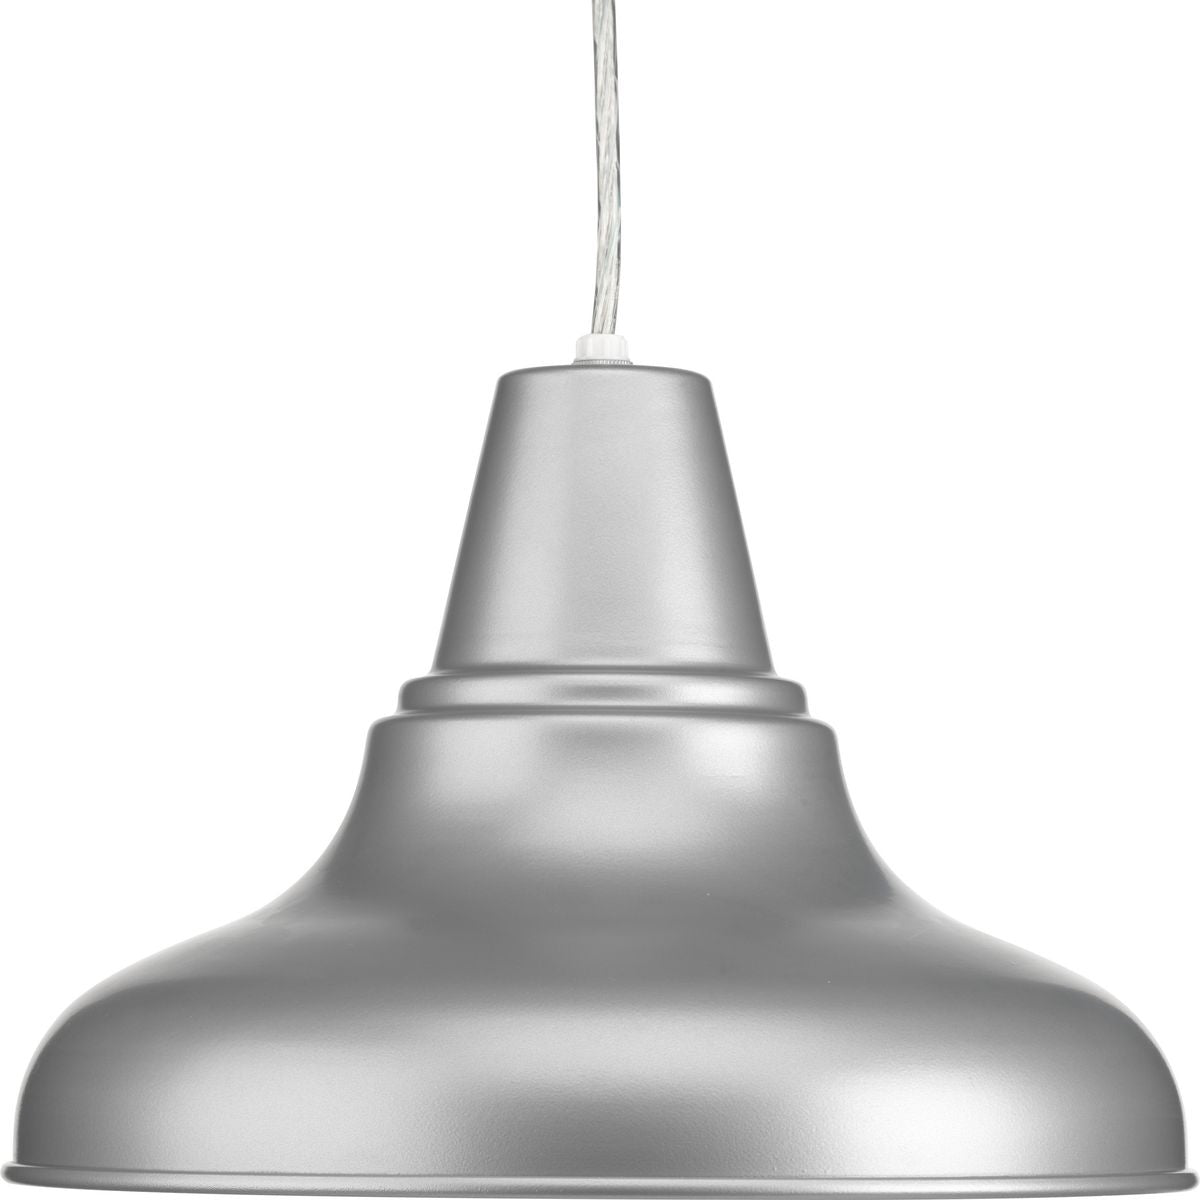 District Outdoor Ceiling Light